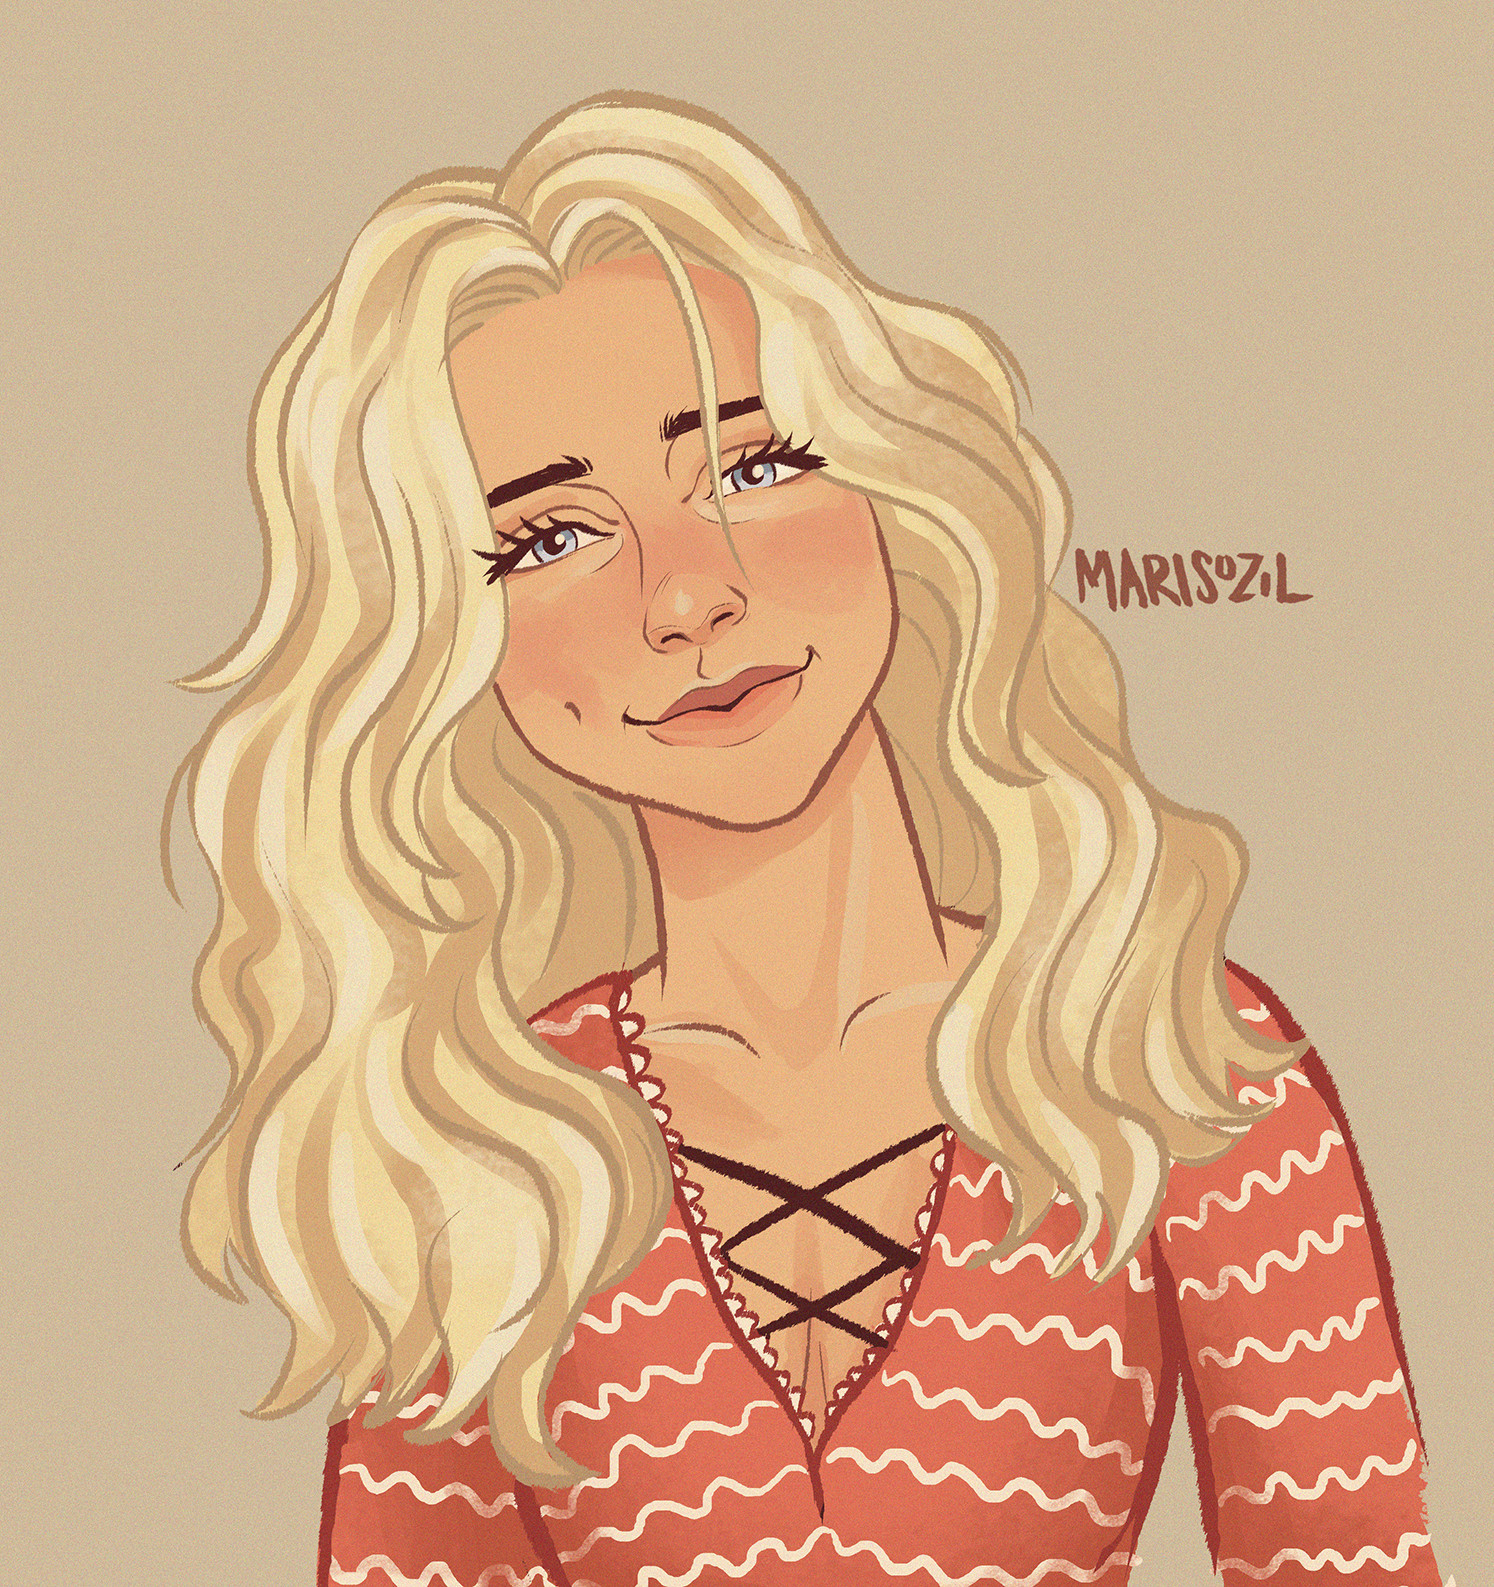 Marisol Vazquez Draw This In Your Style Challenge From Instagram